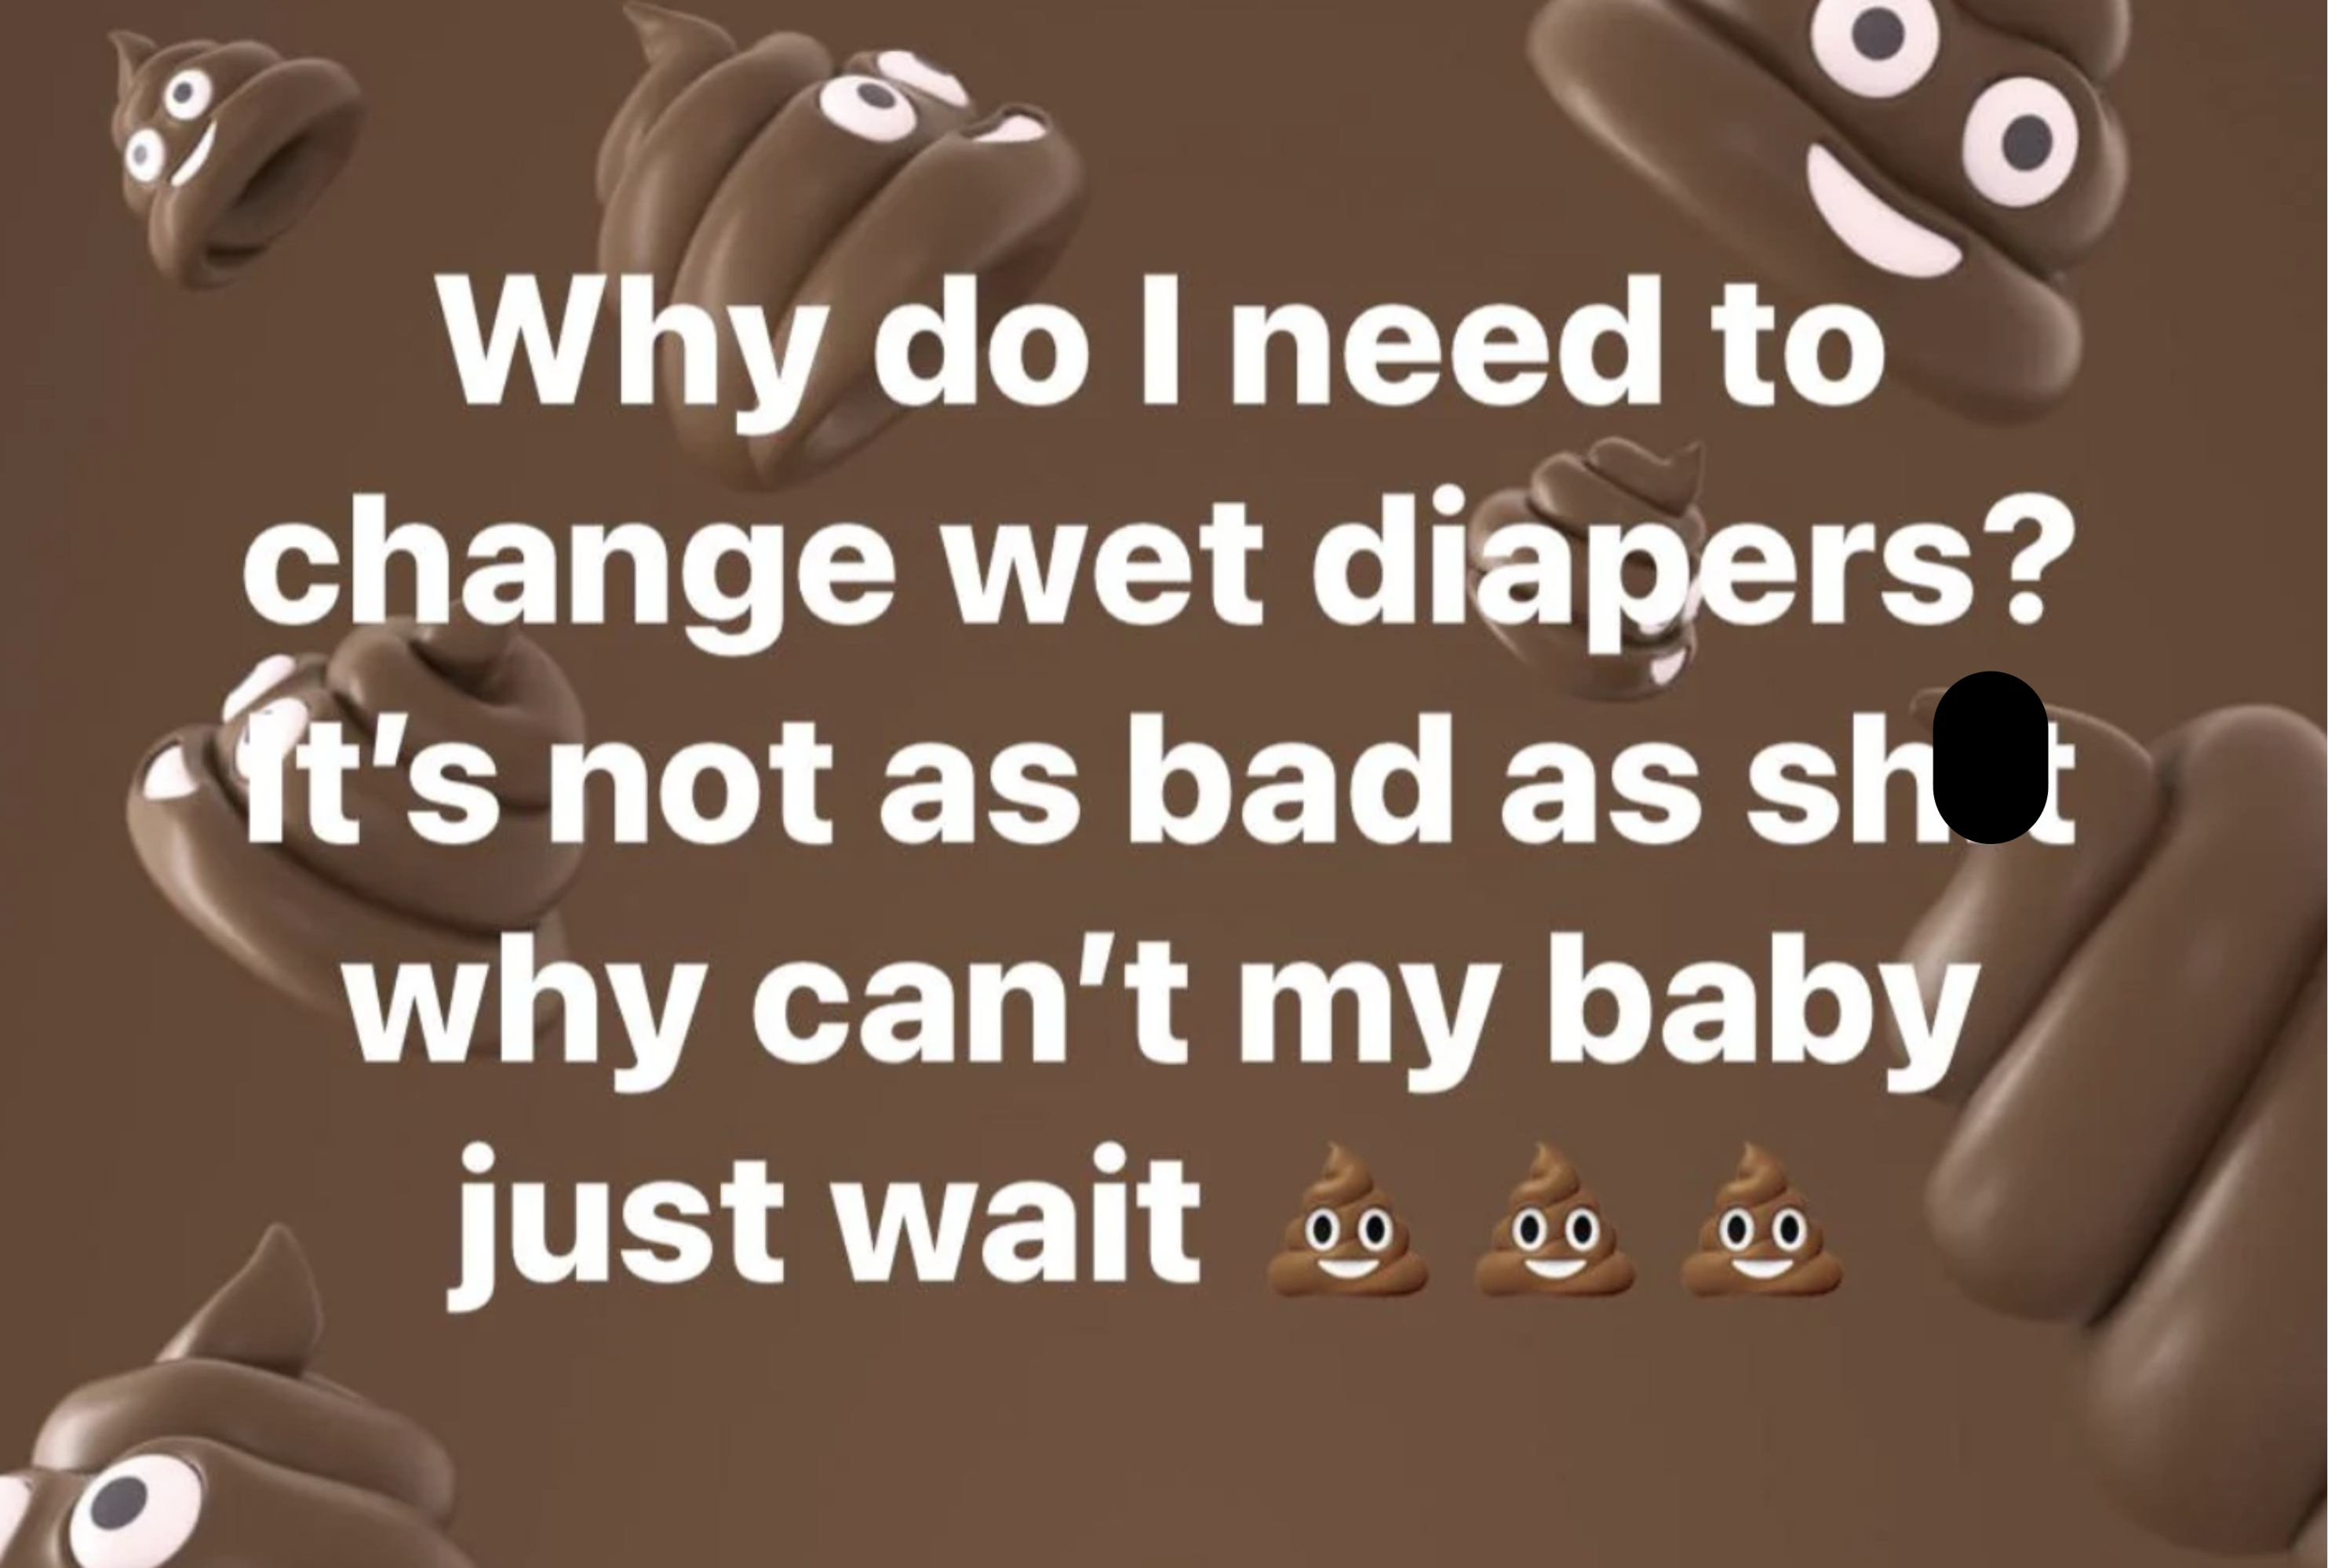 Facebook comment: &quot;Why do I need to change wet diapers? It&#x27;s not as bad as sh*t why can&#x27;t my baby just wait&quot; surrounded by poop emojis